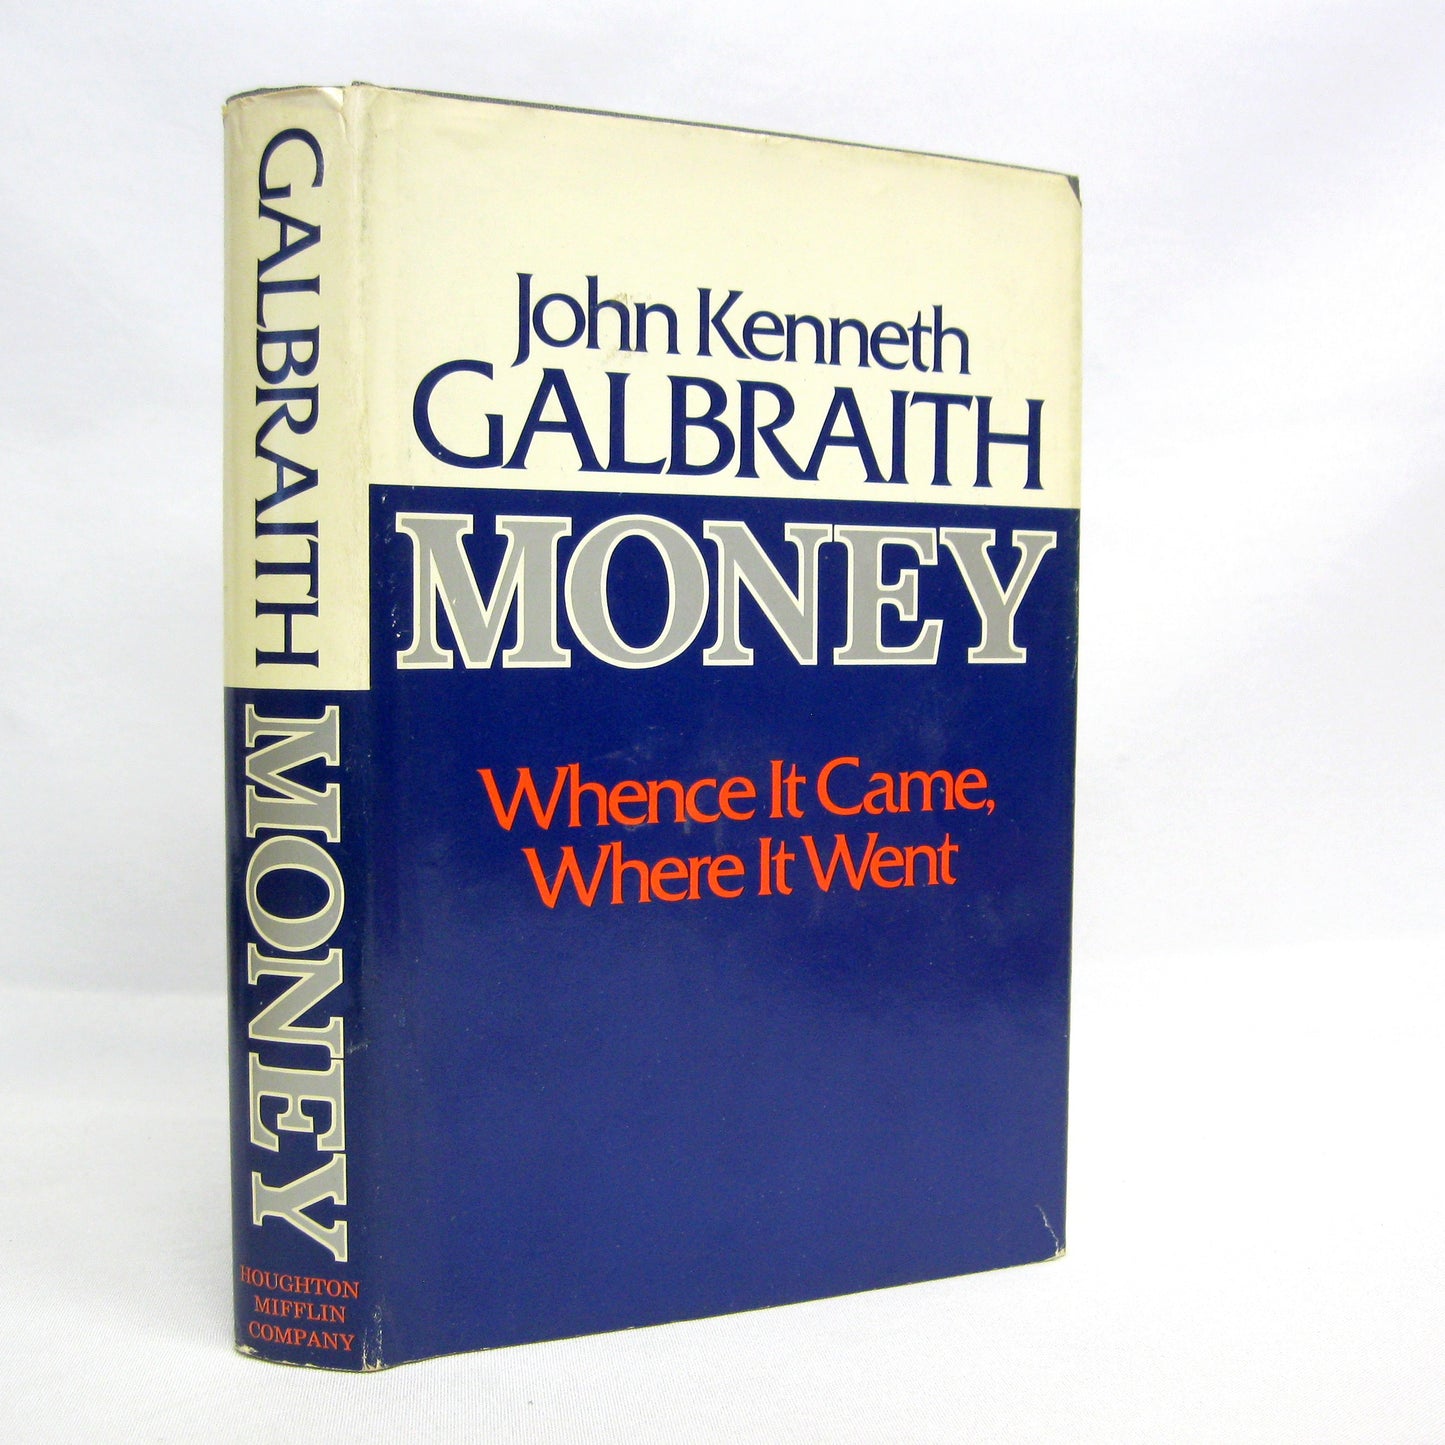 Money: Whence it Came, Where it Went by John Kenneth Galbraith